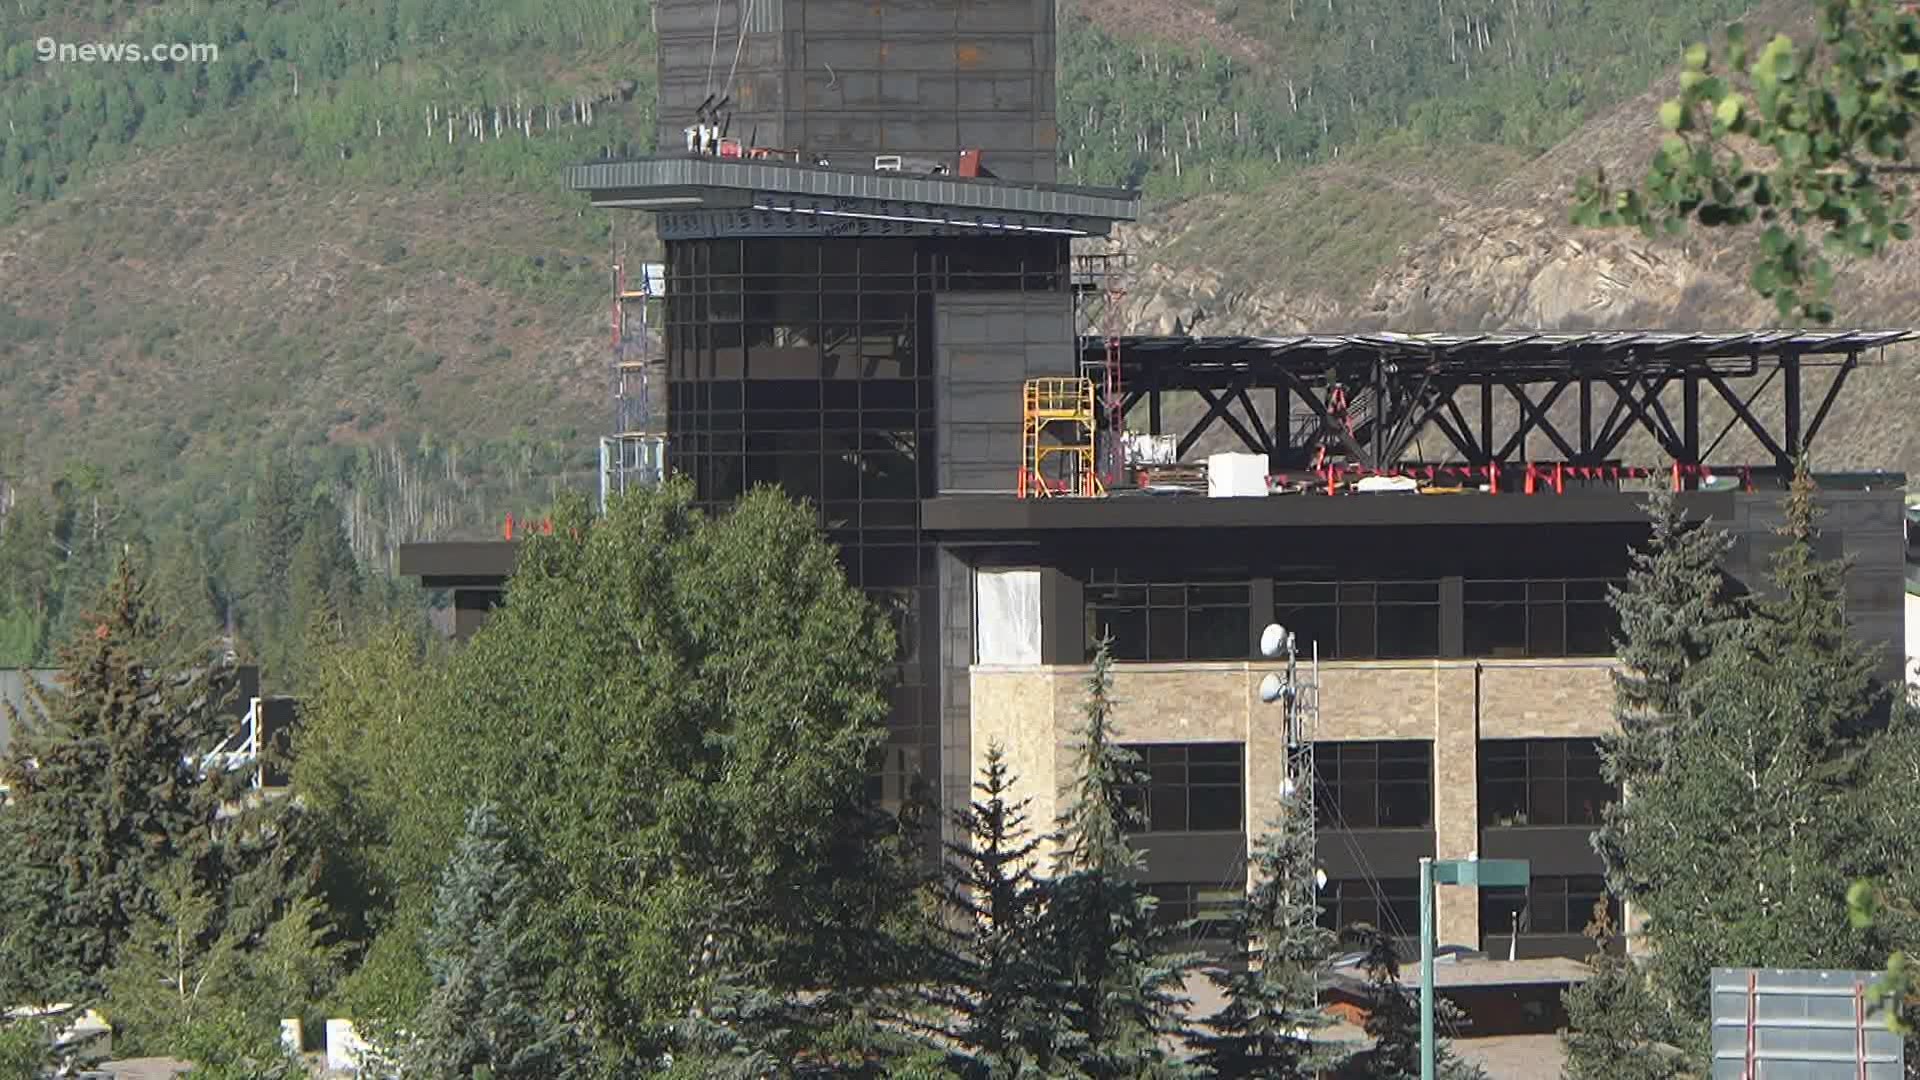 A new hospital in Vail will have a helipad on the roof, replacing the old pad that cost patients 30 to 45 minutes in extra travel time.